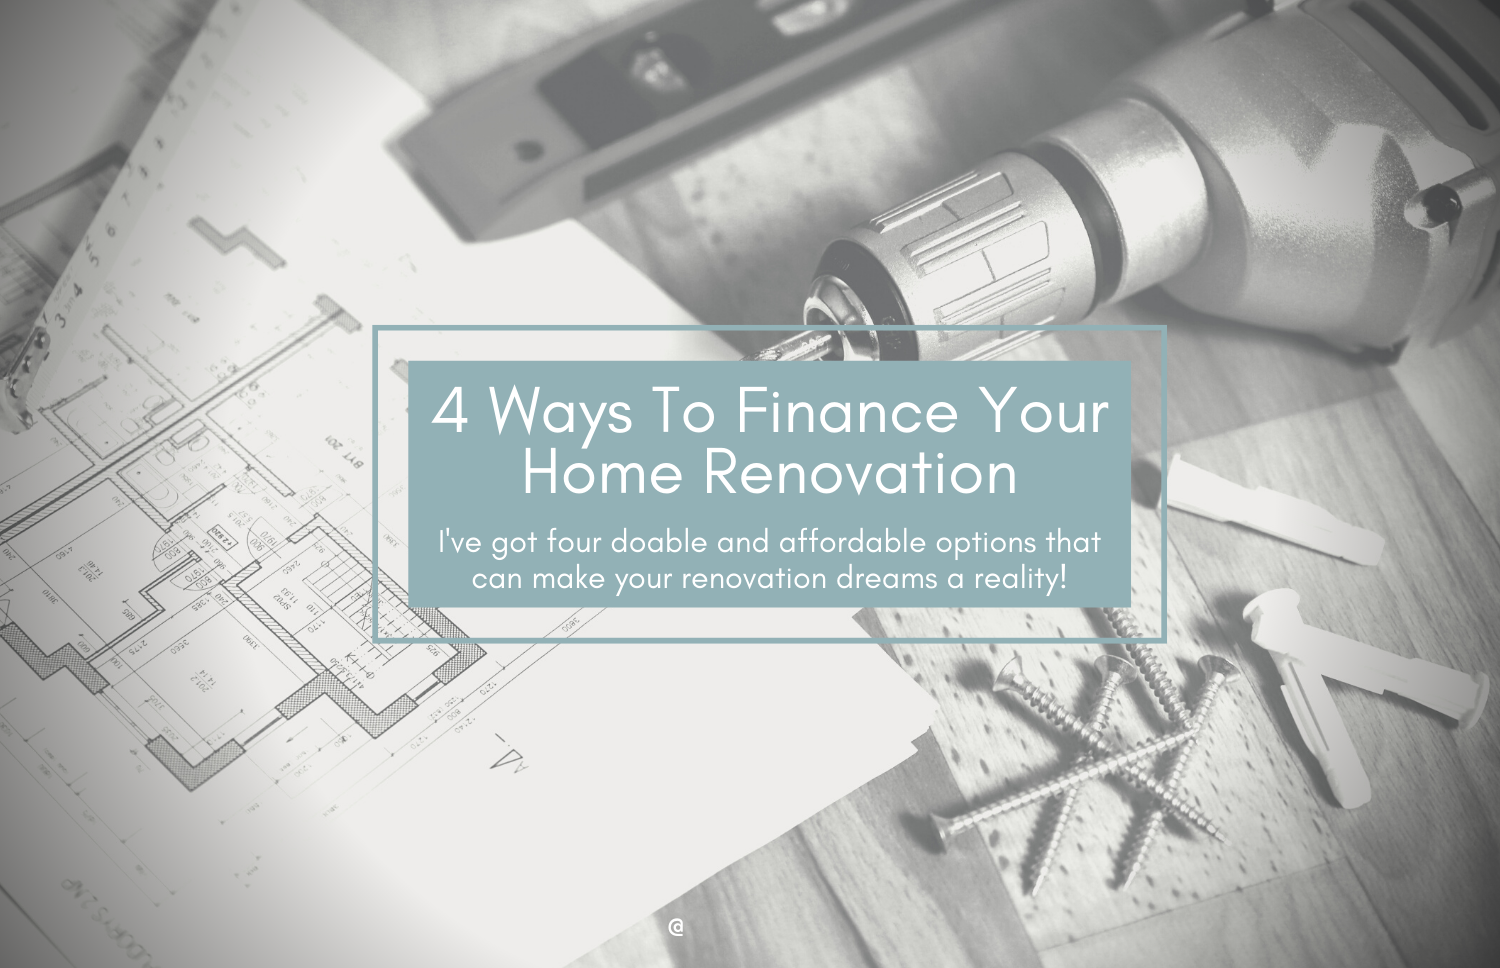 4 Ways To Finance Your Home Renovation